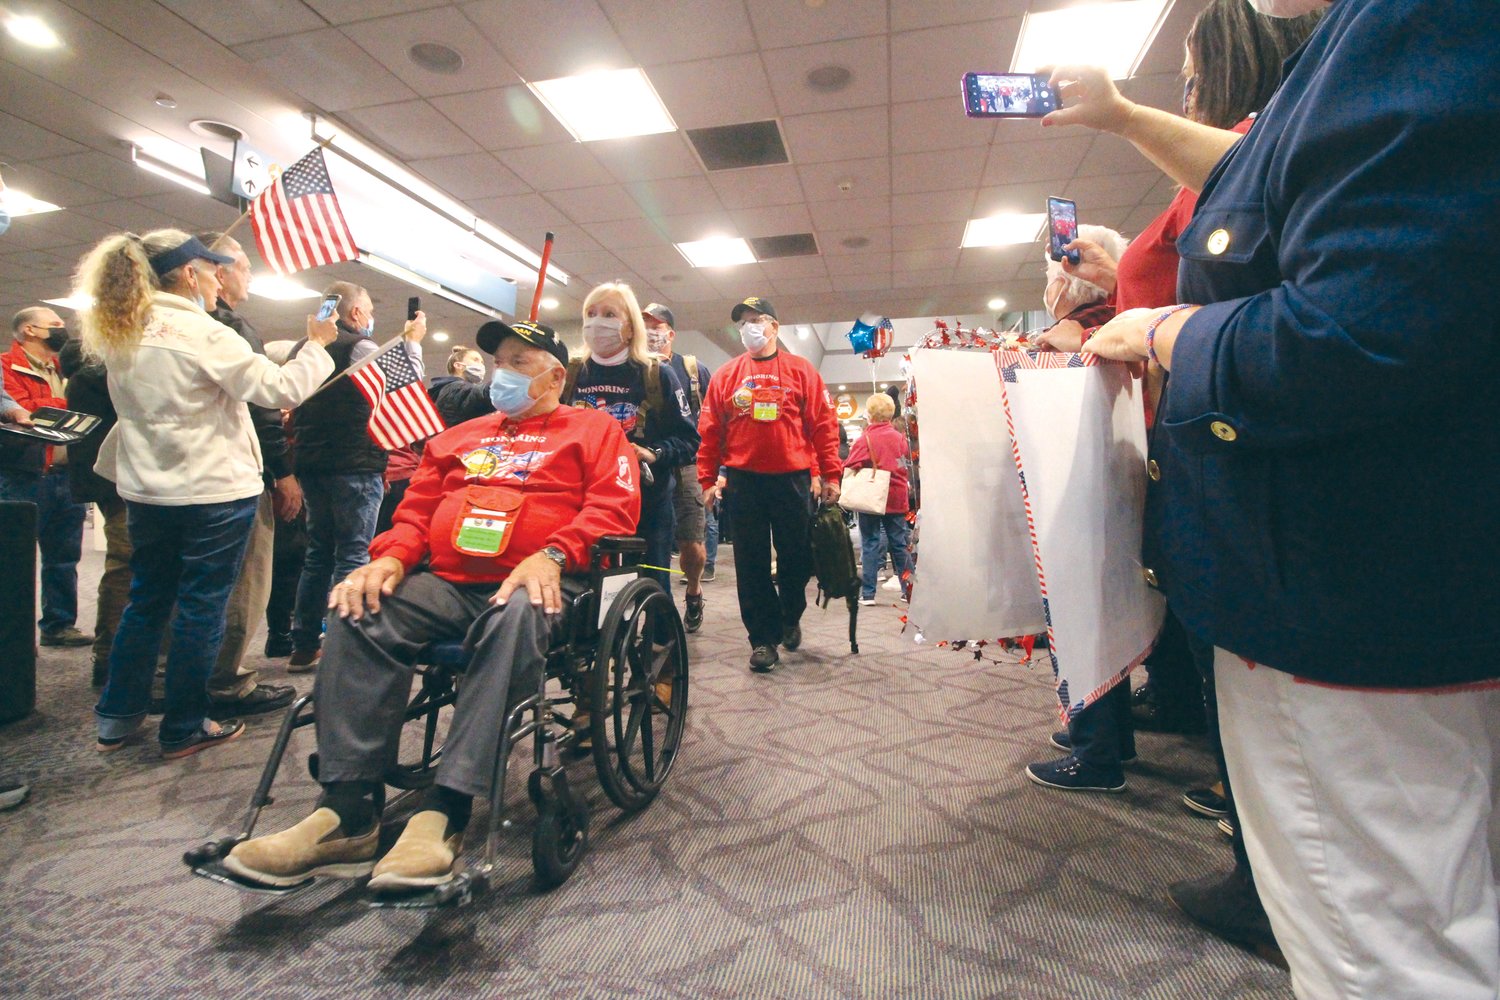 THEIR SERVICE ACKNOWLEDGED: Veterans arrive at the airport to cheers waving flags and the music of the
fifes and drums.